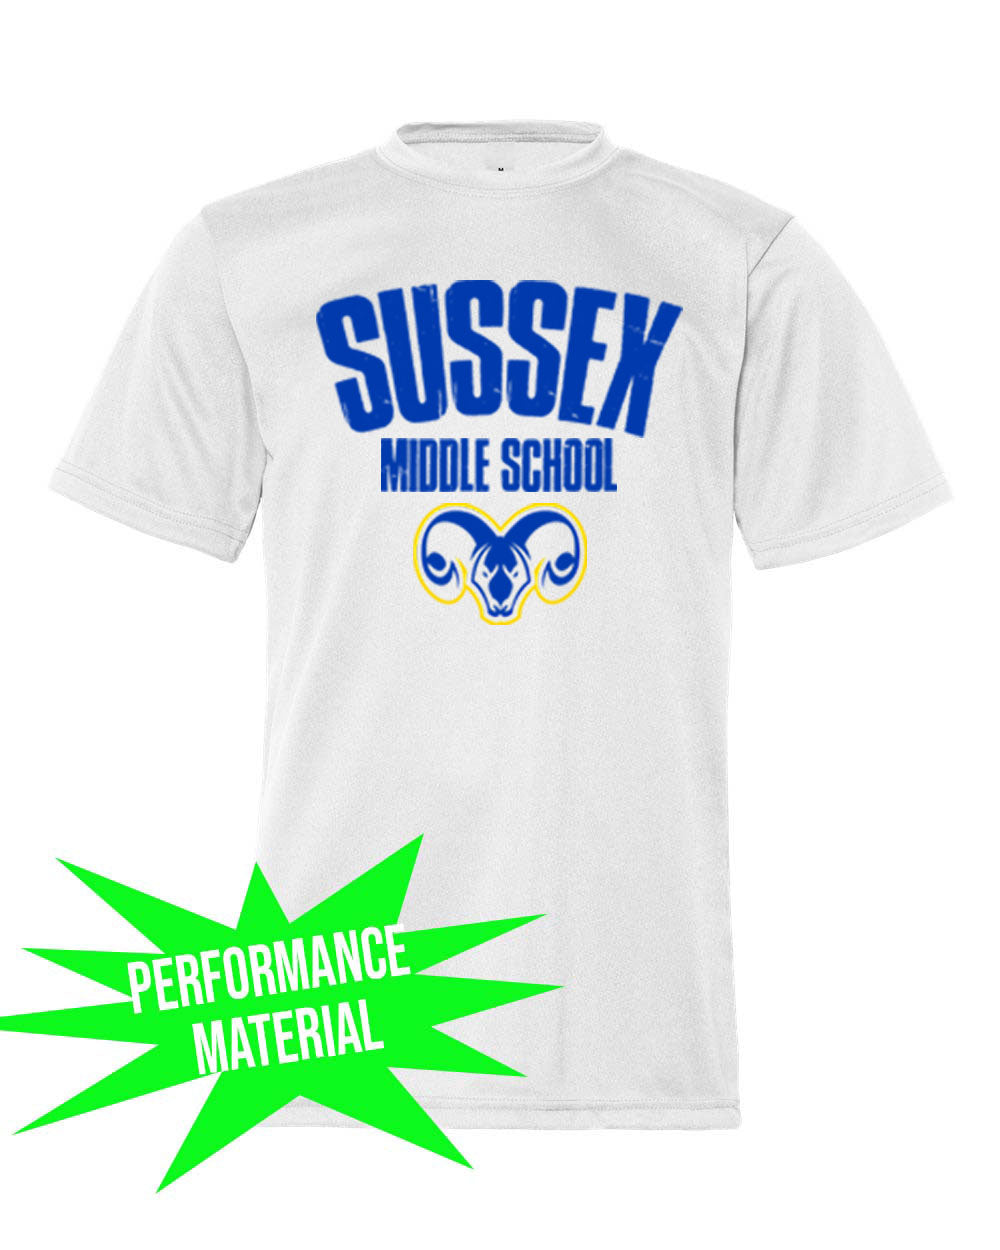 Sussex Middle Performance Material design 4 T-Shirt